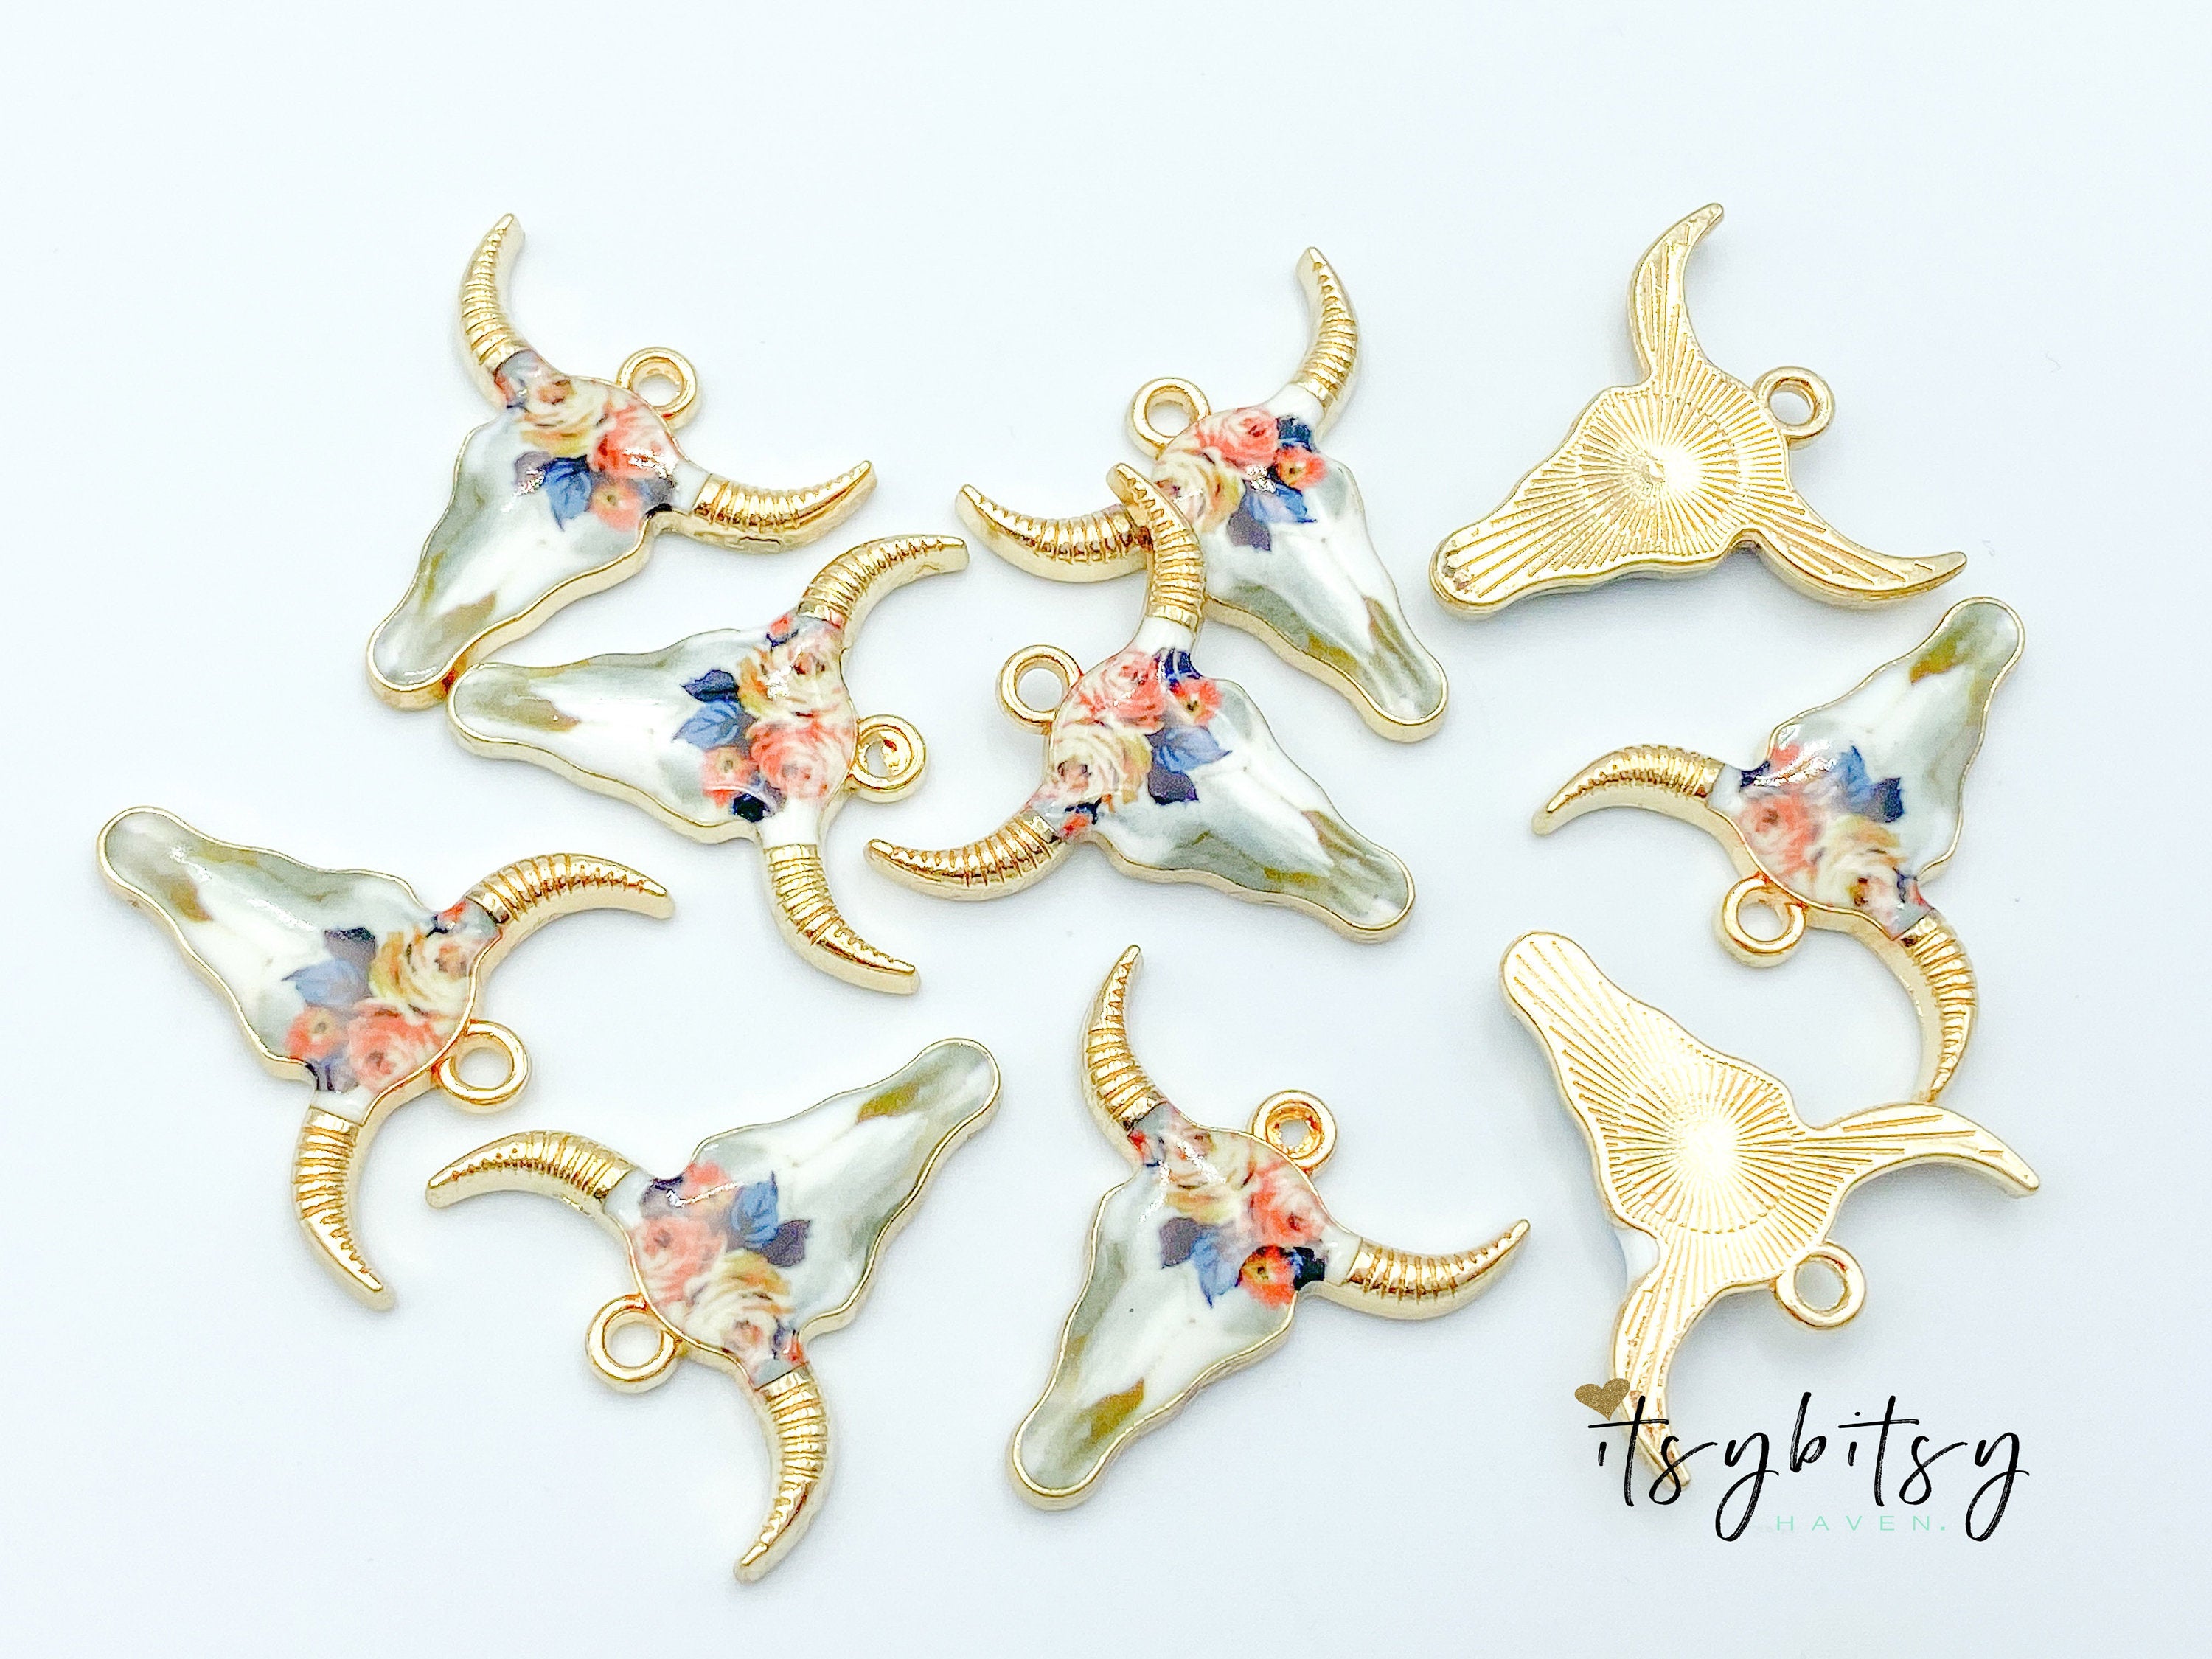 2pcs, 22x21mm, Zinc Based Alloy Bohemian Boho Charms Bull Cow Animal charm in Gold Plating, Blush and Blue Floral Enamel